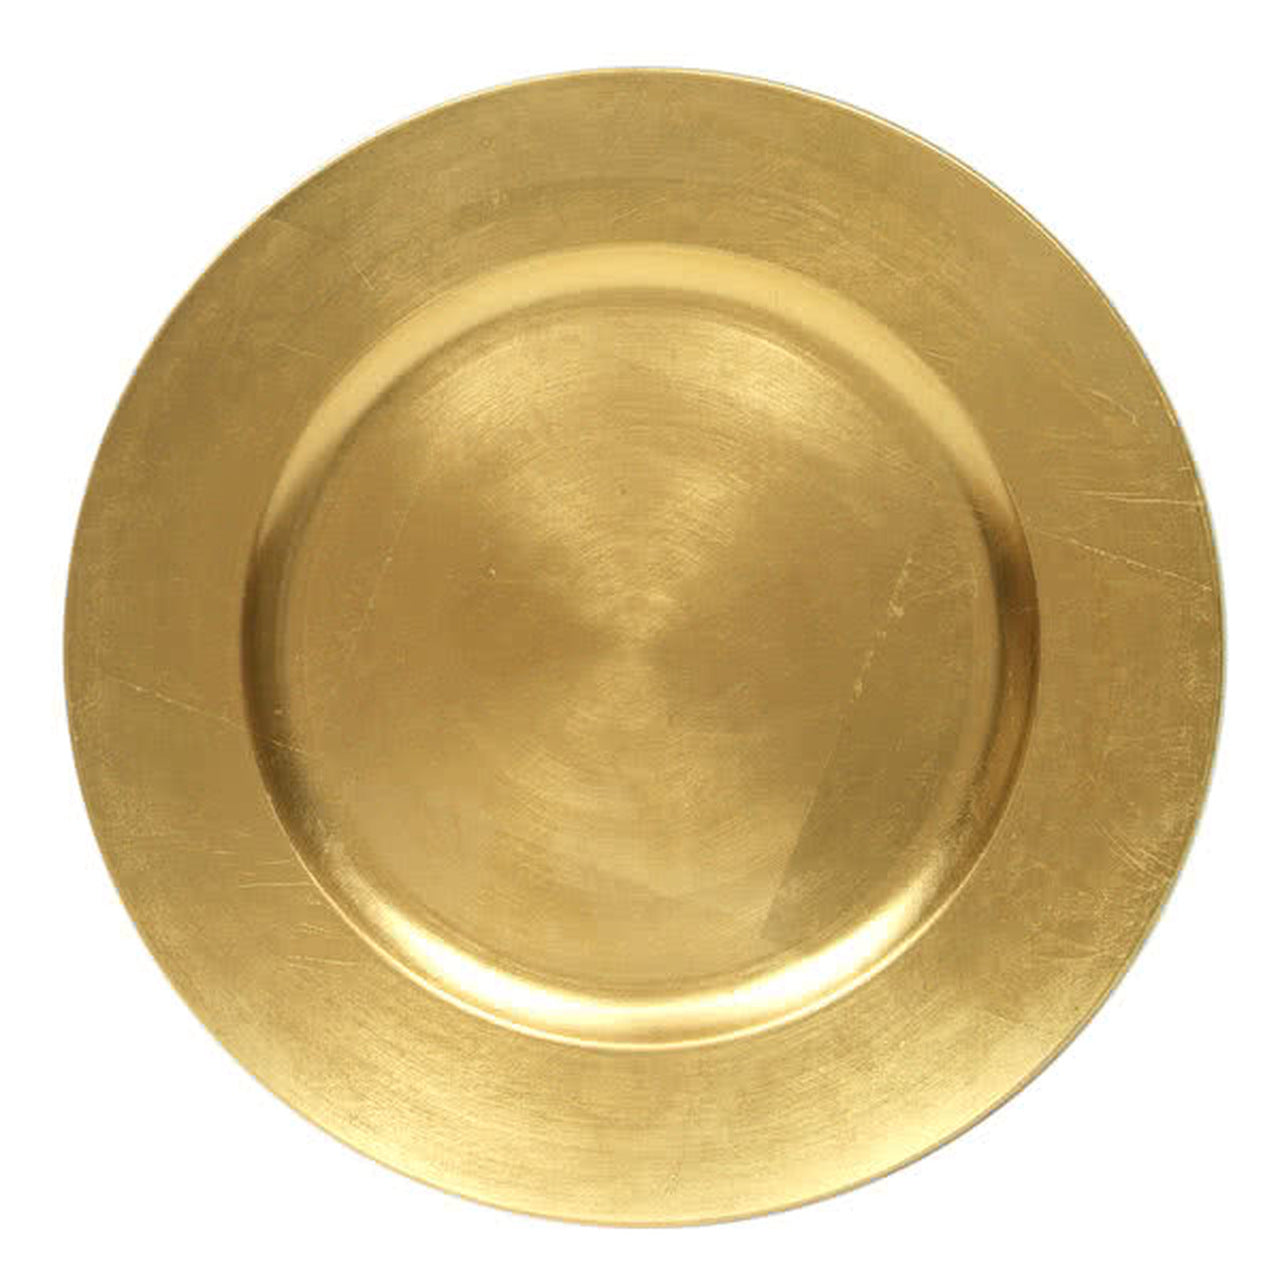 Gold charger plate - Wellington Wedding Hire